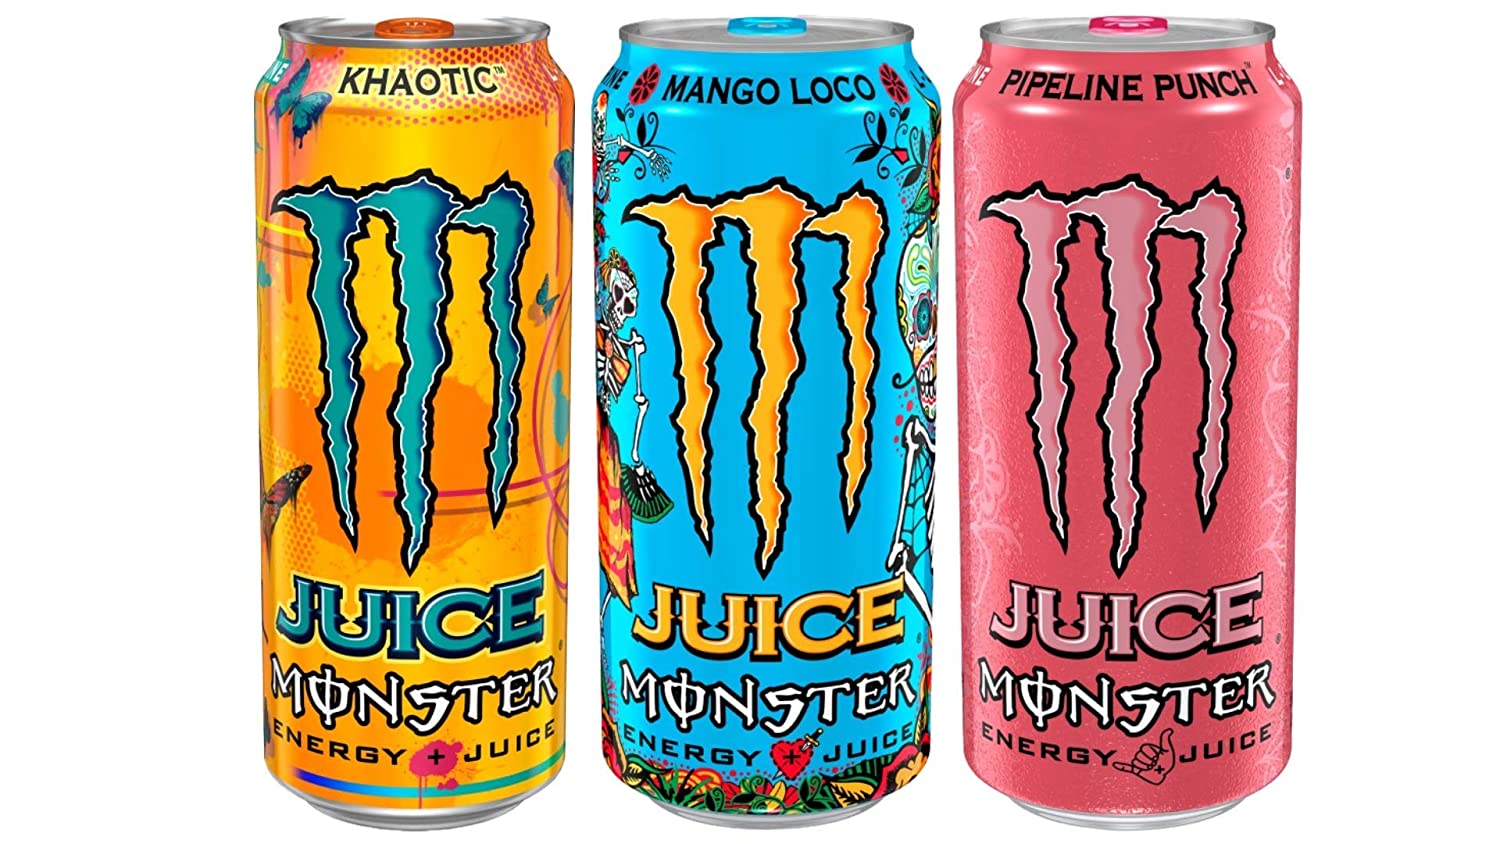 What Flavour is monster fruit punch?